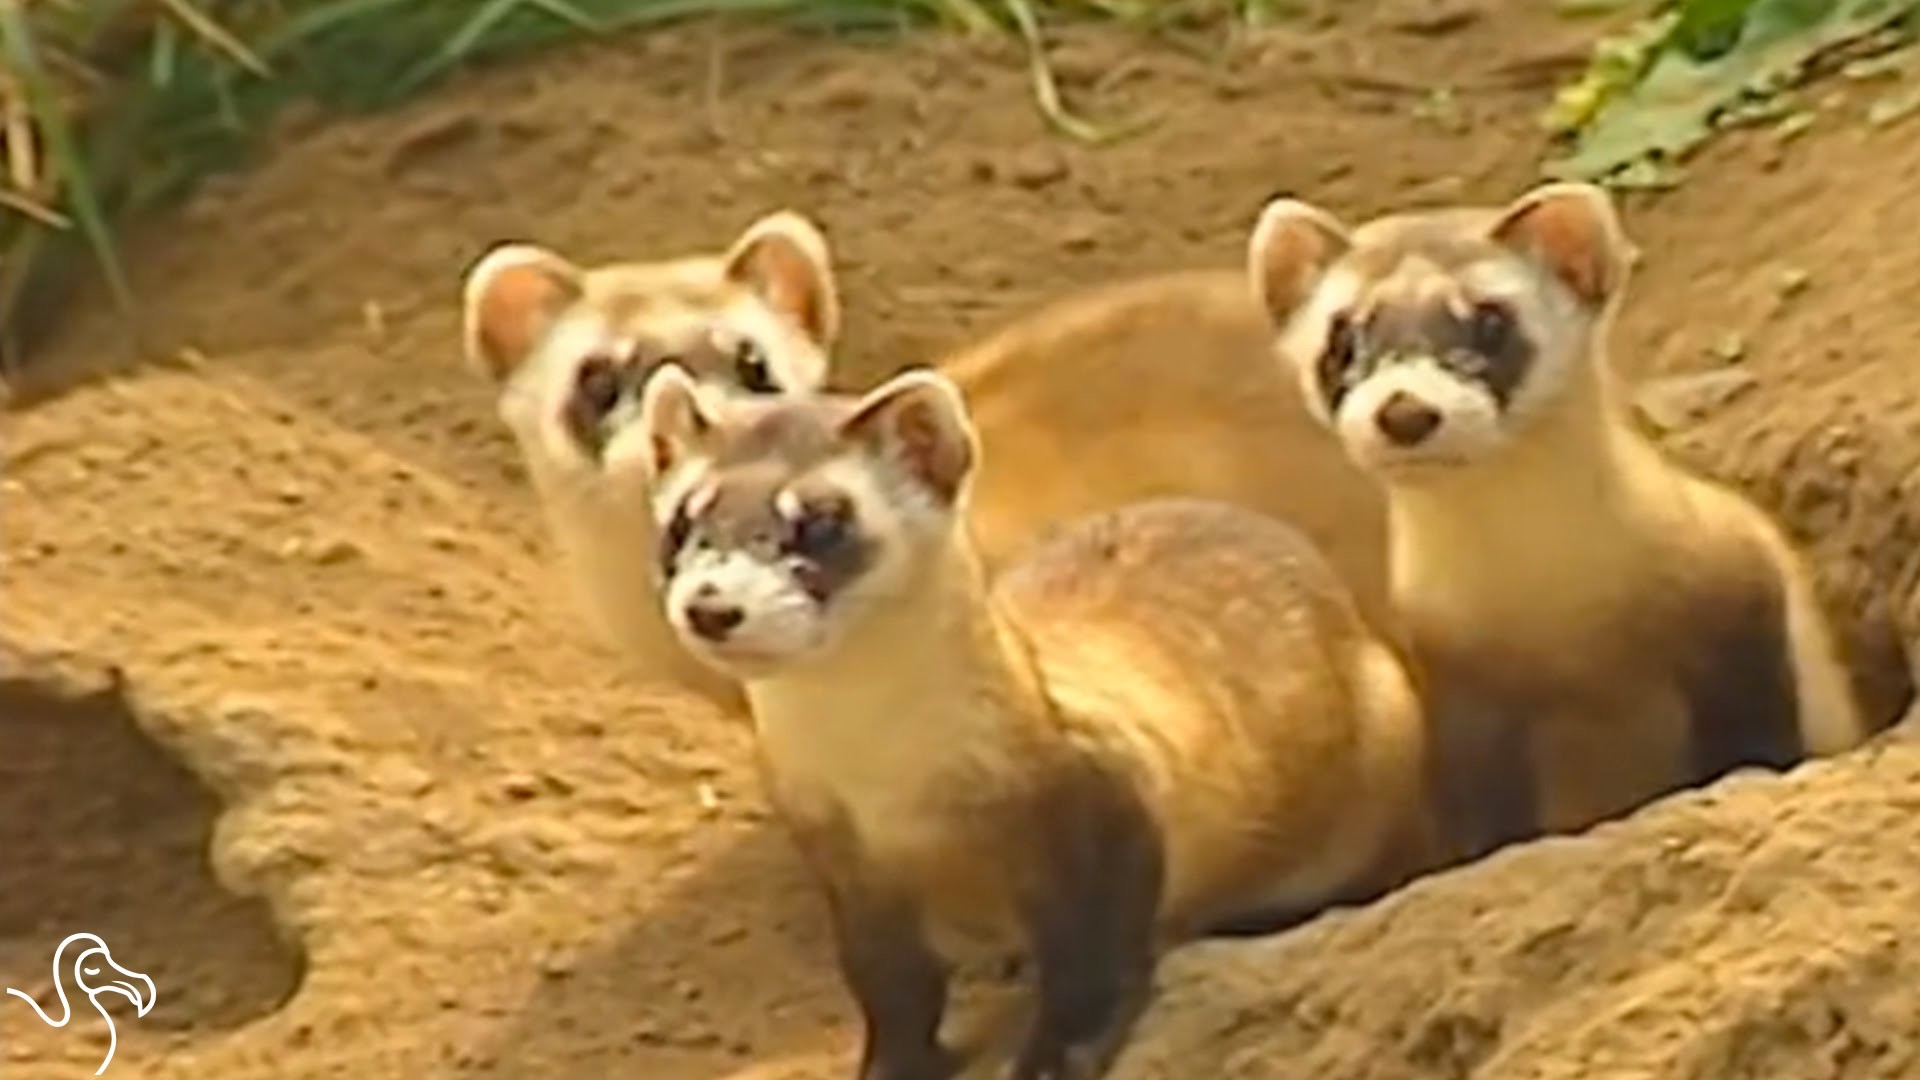 1920x1080 Peanut butter-covered M&Ms could save wild ferrets from extinction